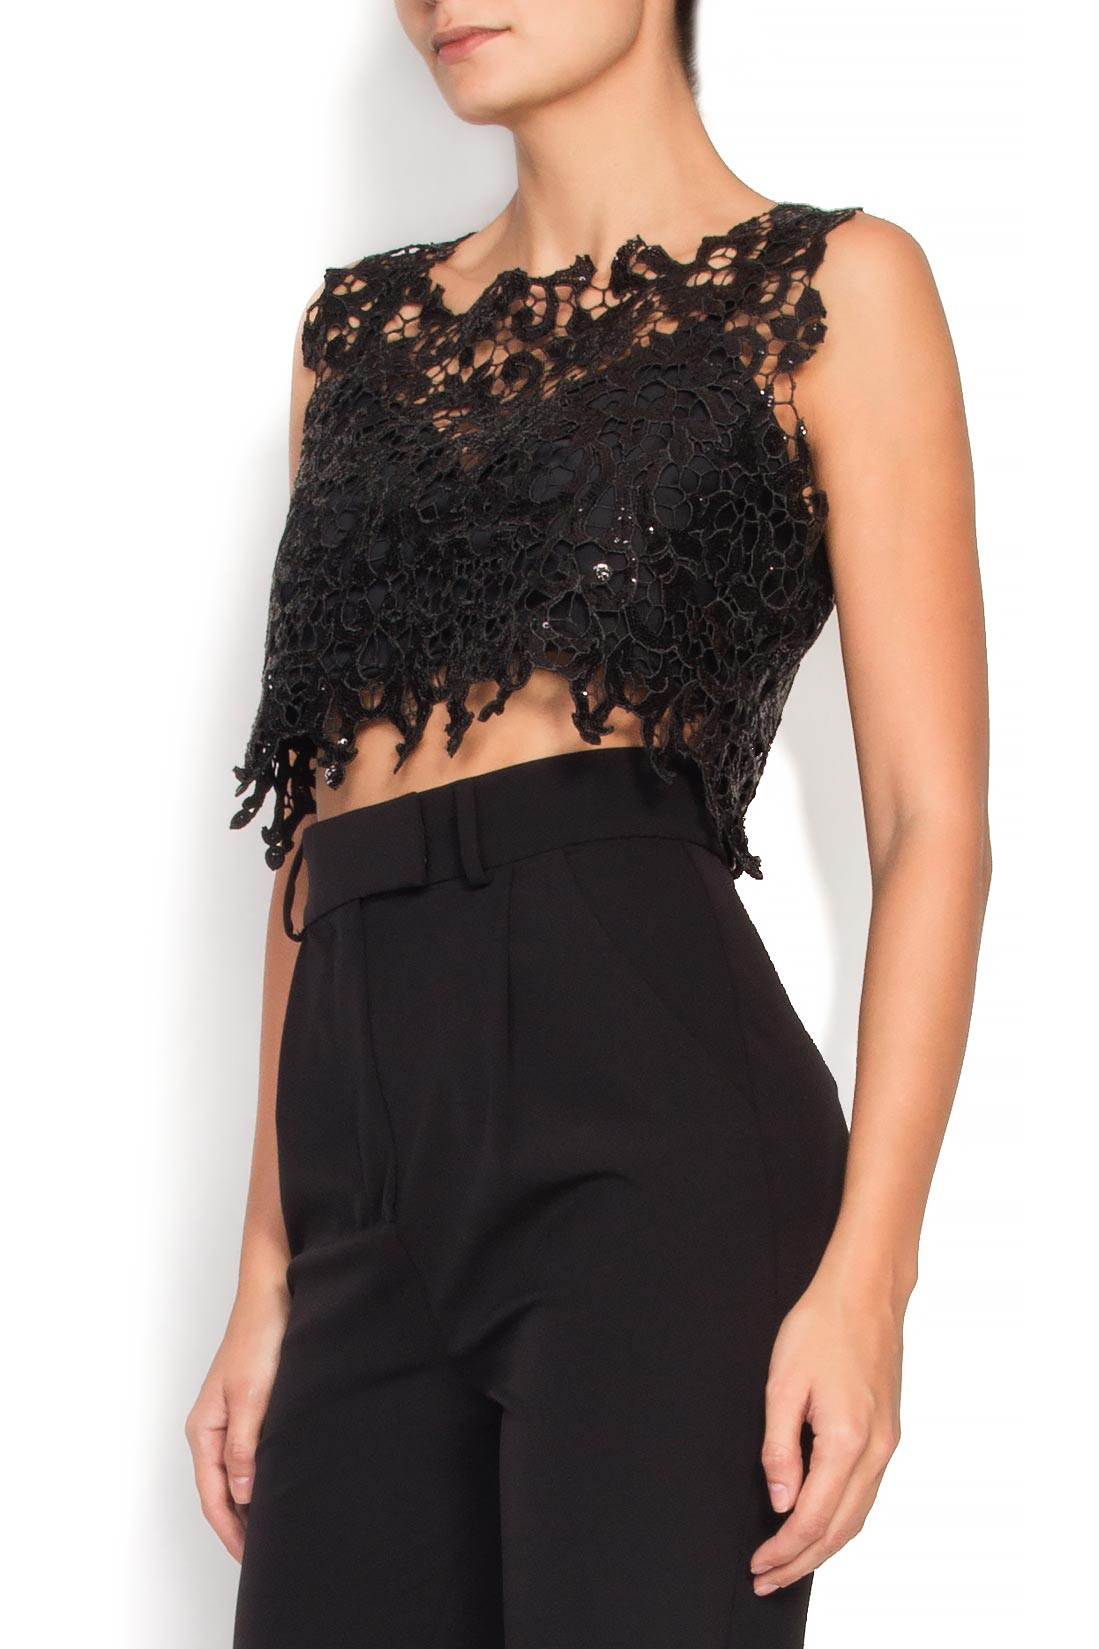 Sequin-embellished lace top B.A.D. Style by Adriana Barar image 1